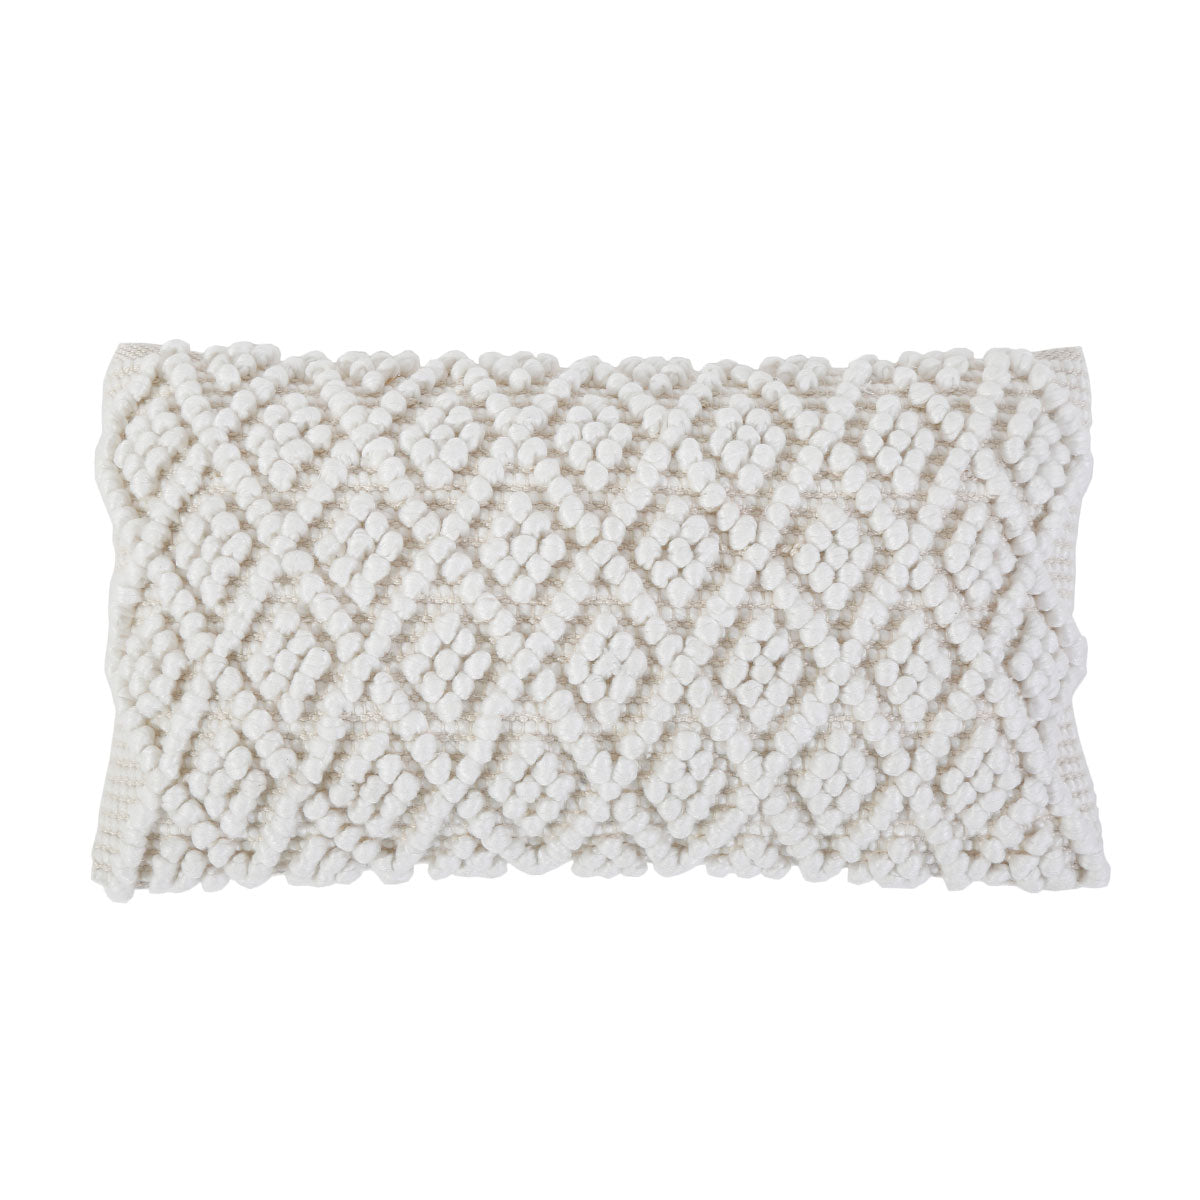 COCO HAND WOVEN PILLOW 14" x 24" with insert-Pom Pom at Home